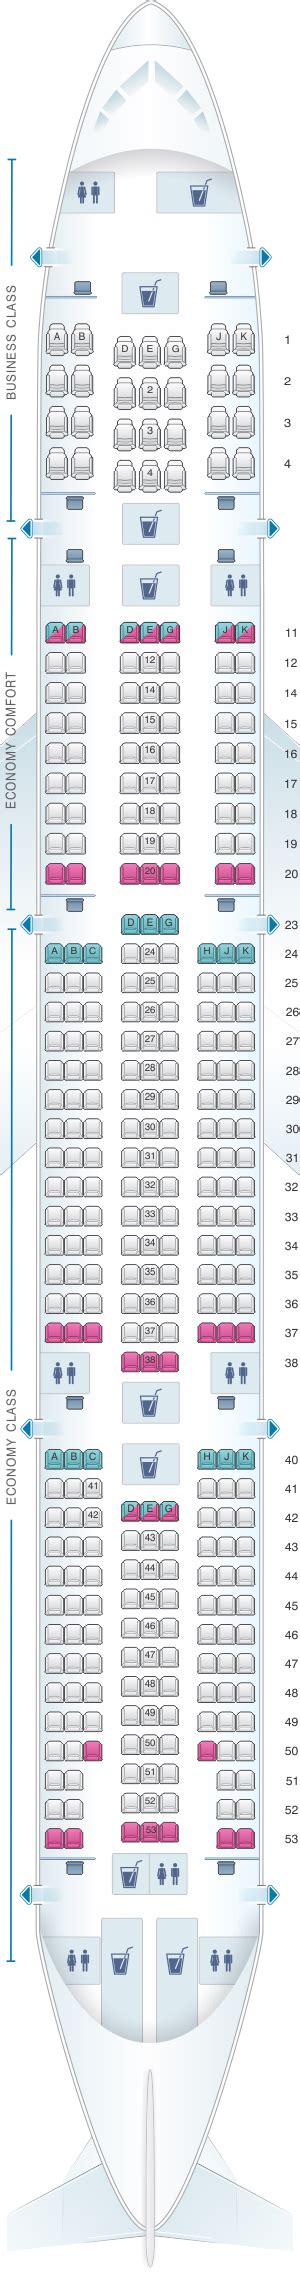 Boeing Seating Chart Turkish Airlines